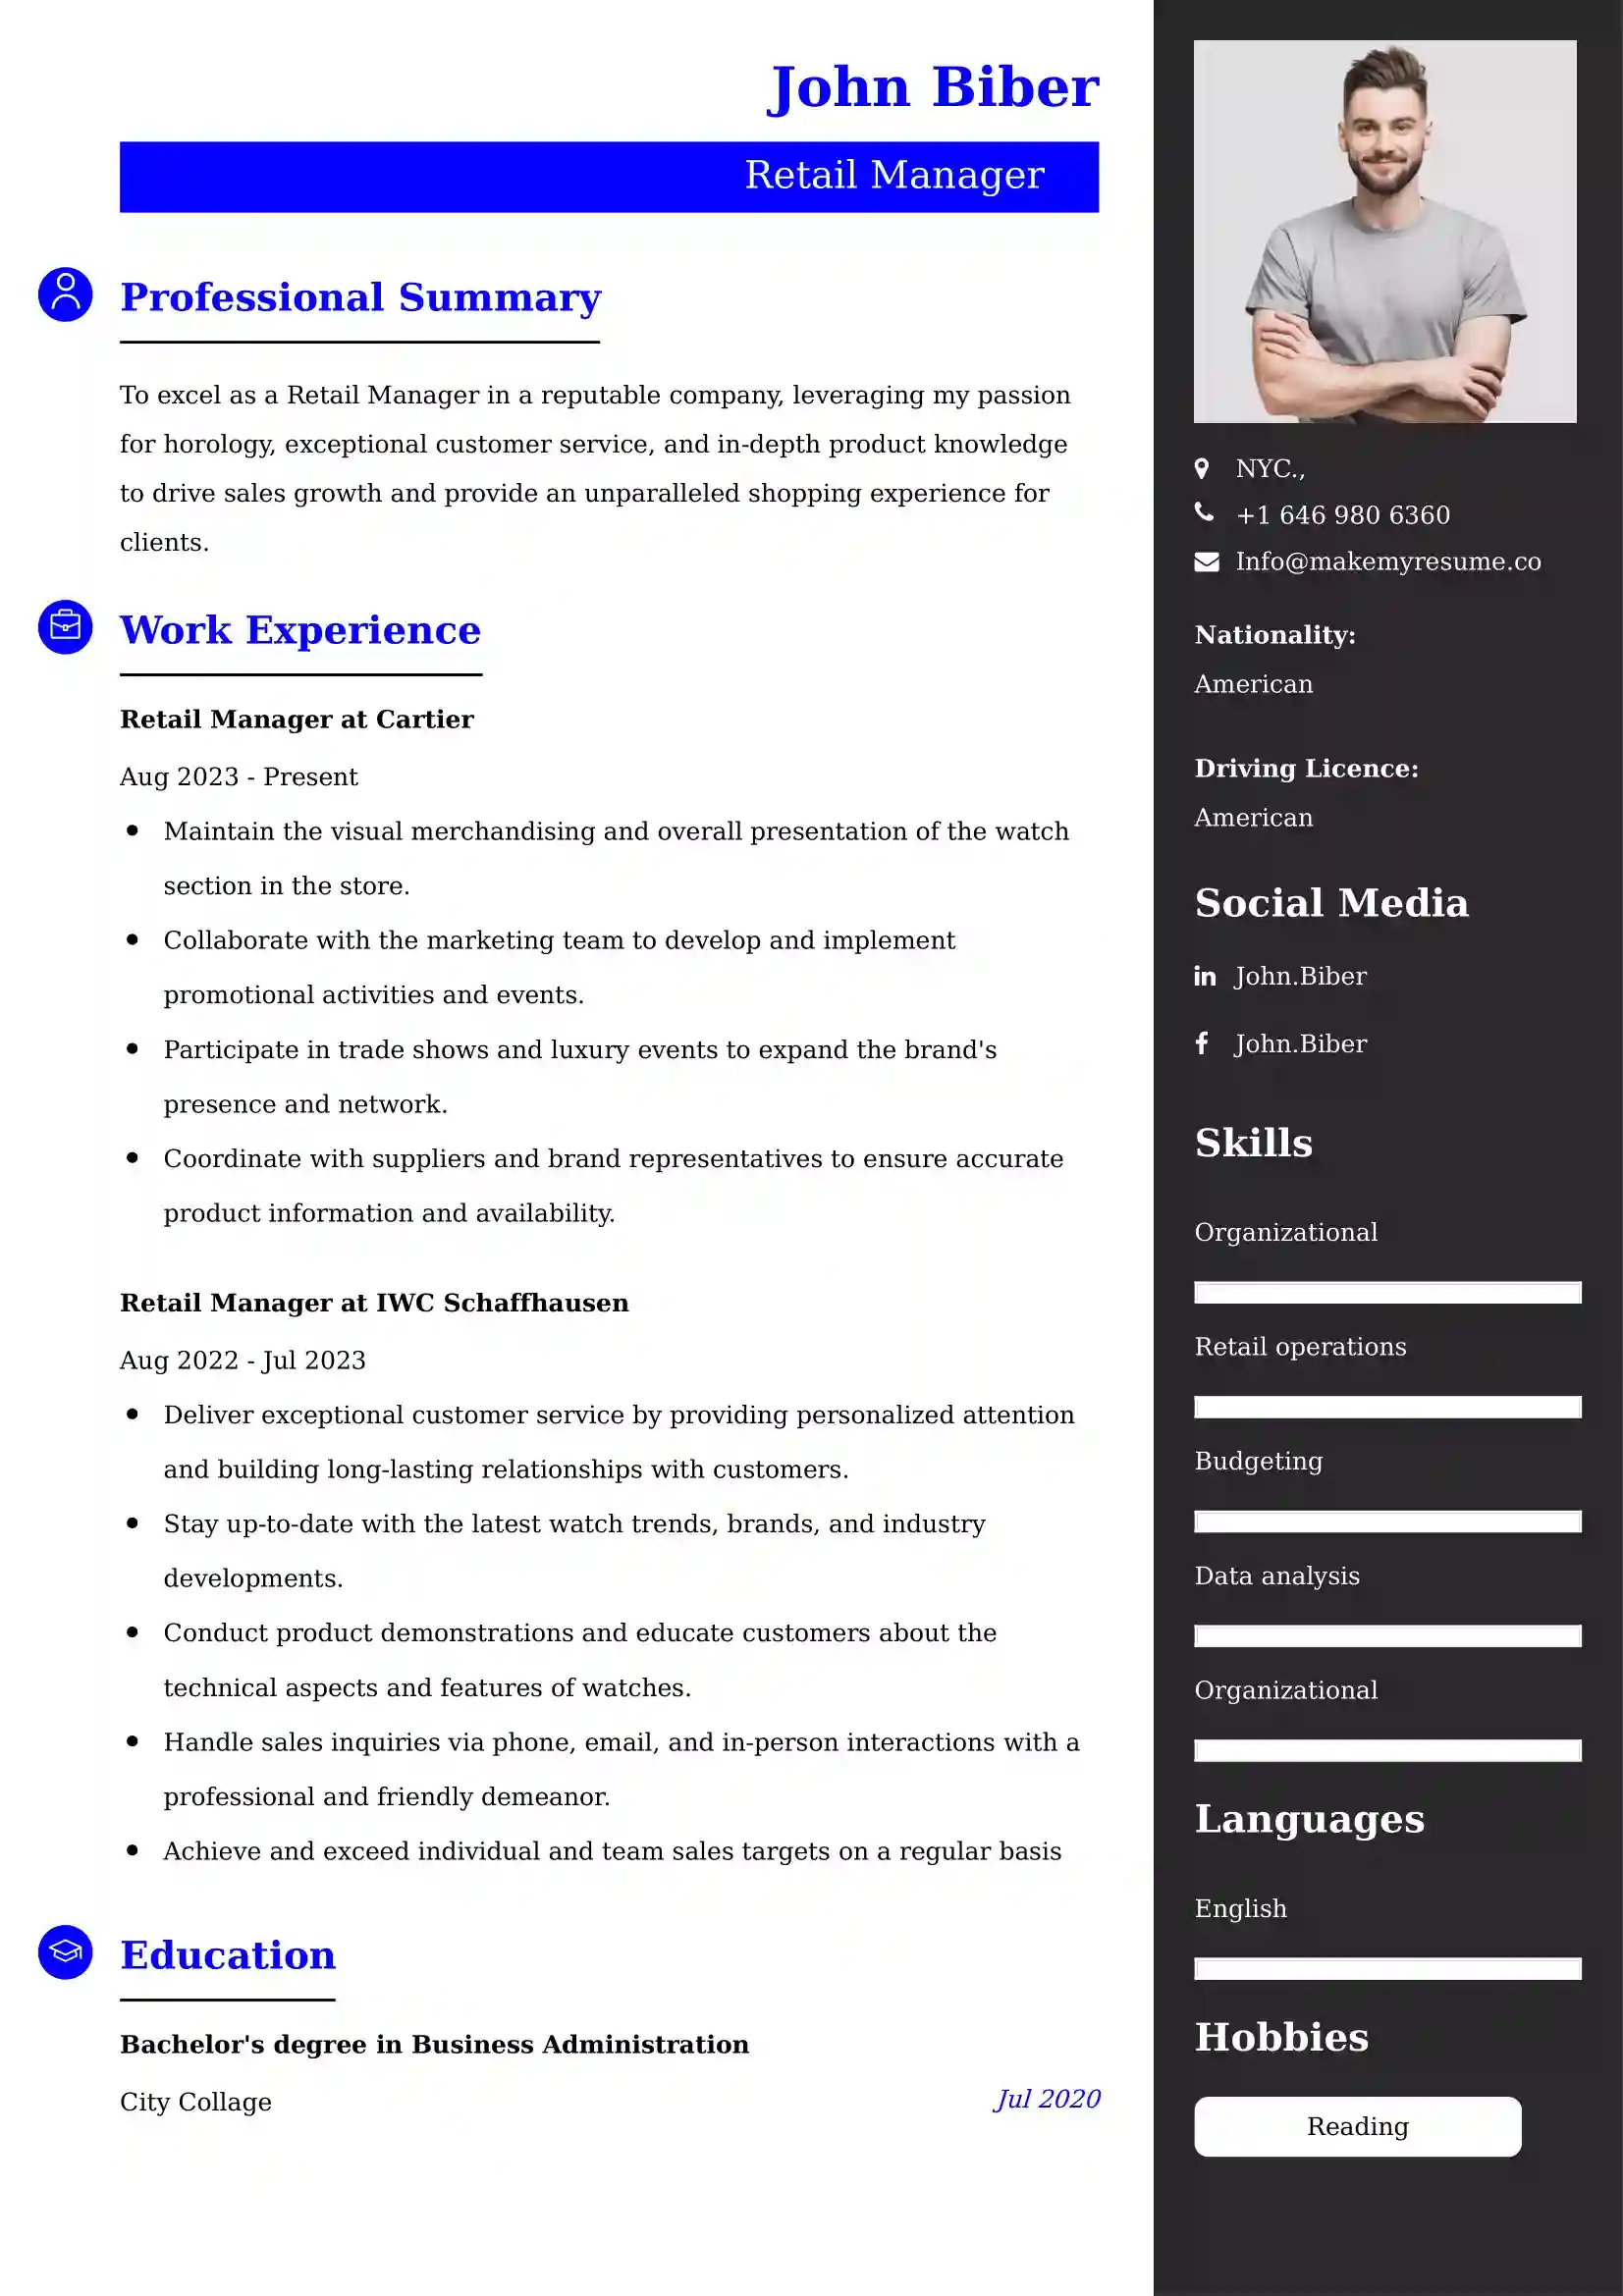 75+ Professional Retail Resume Examples, Latest Format